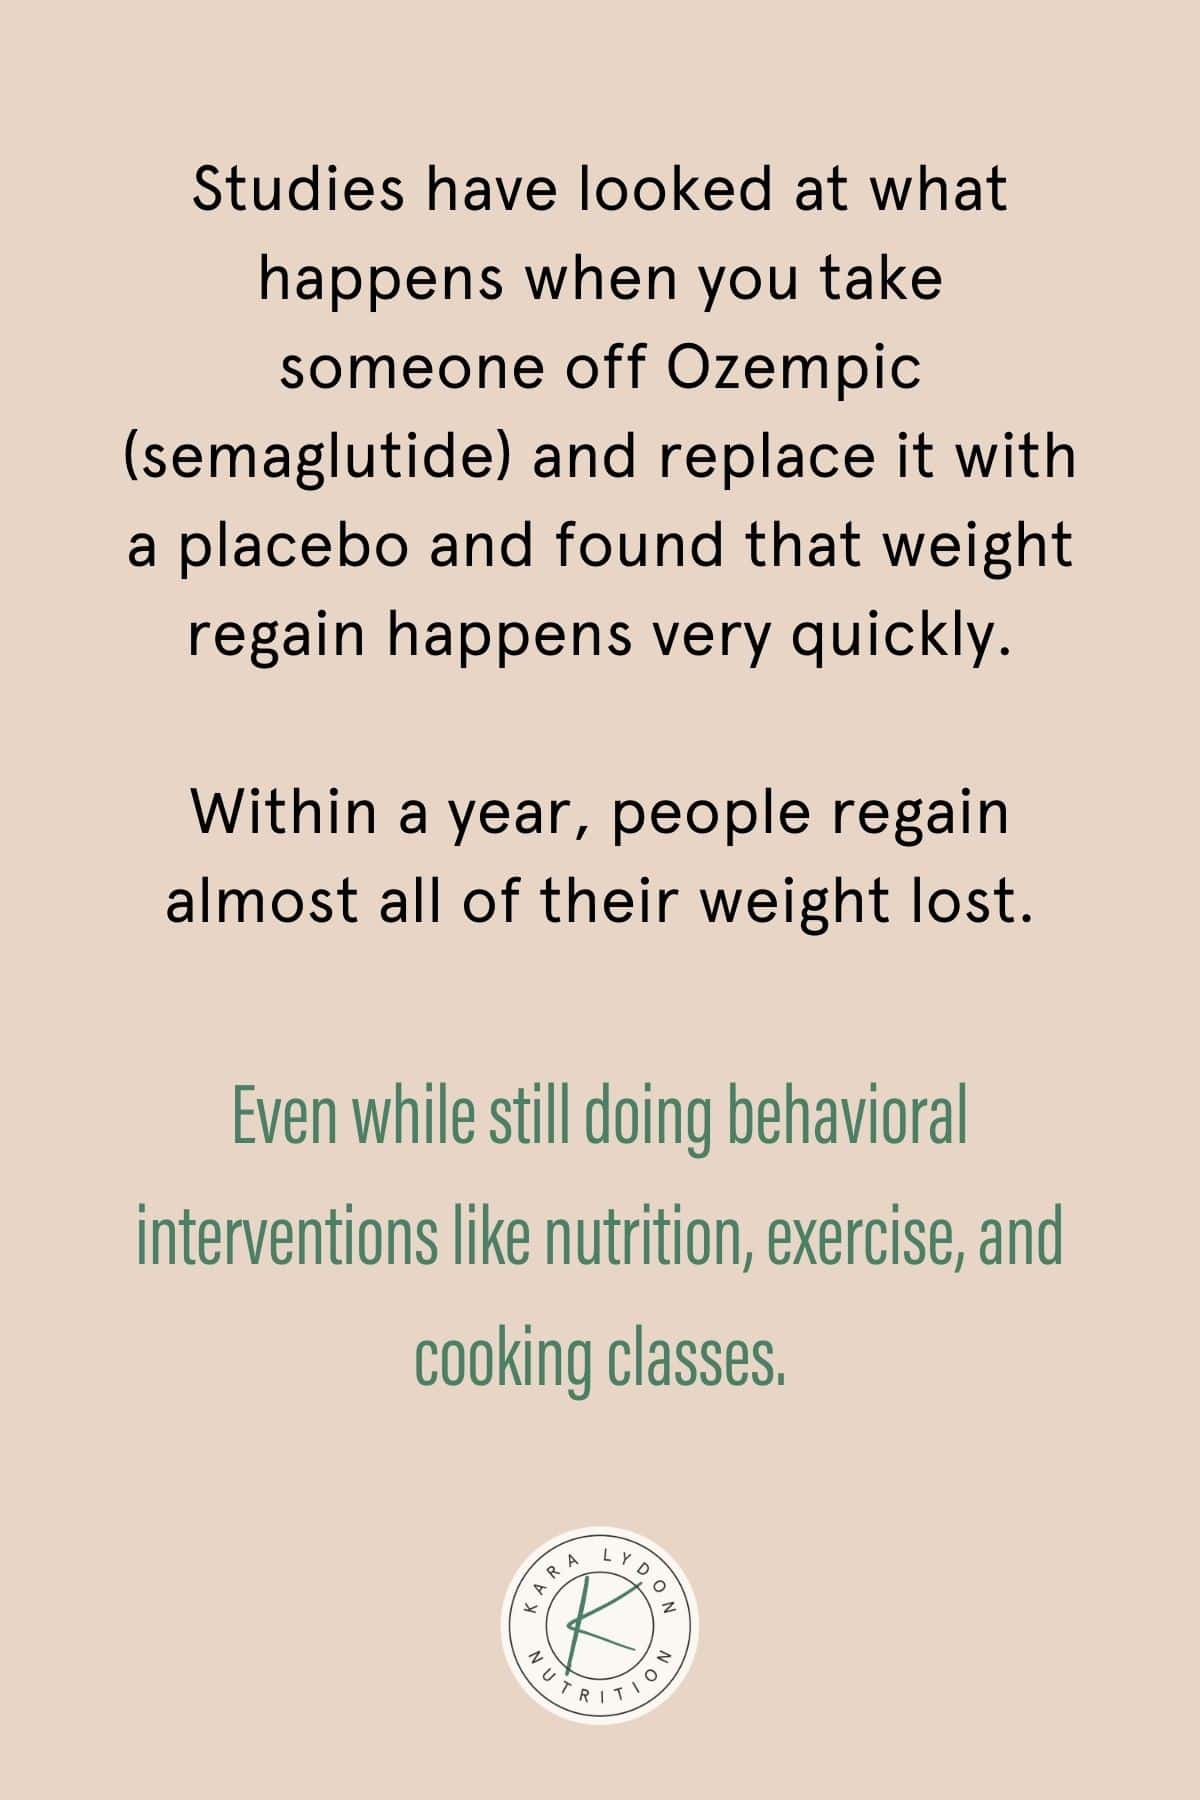 Graphic with quote: "Studies have looked at what happens when you take someone off Ozempic (semaglutide) and replace it with a placebo and found that weight regain happens very quickly. Within a year, people regain almost all of their weight lost, even while still doing behavioral interventions like nutrition, exercise, and cooking classes."